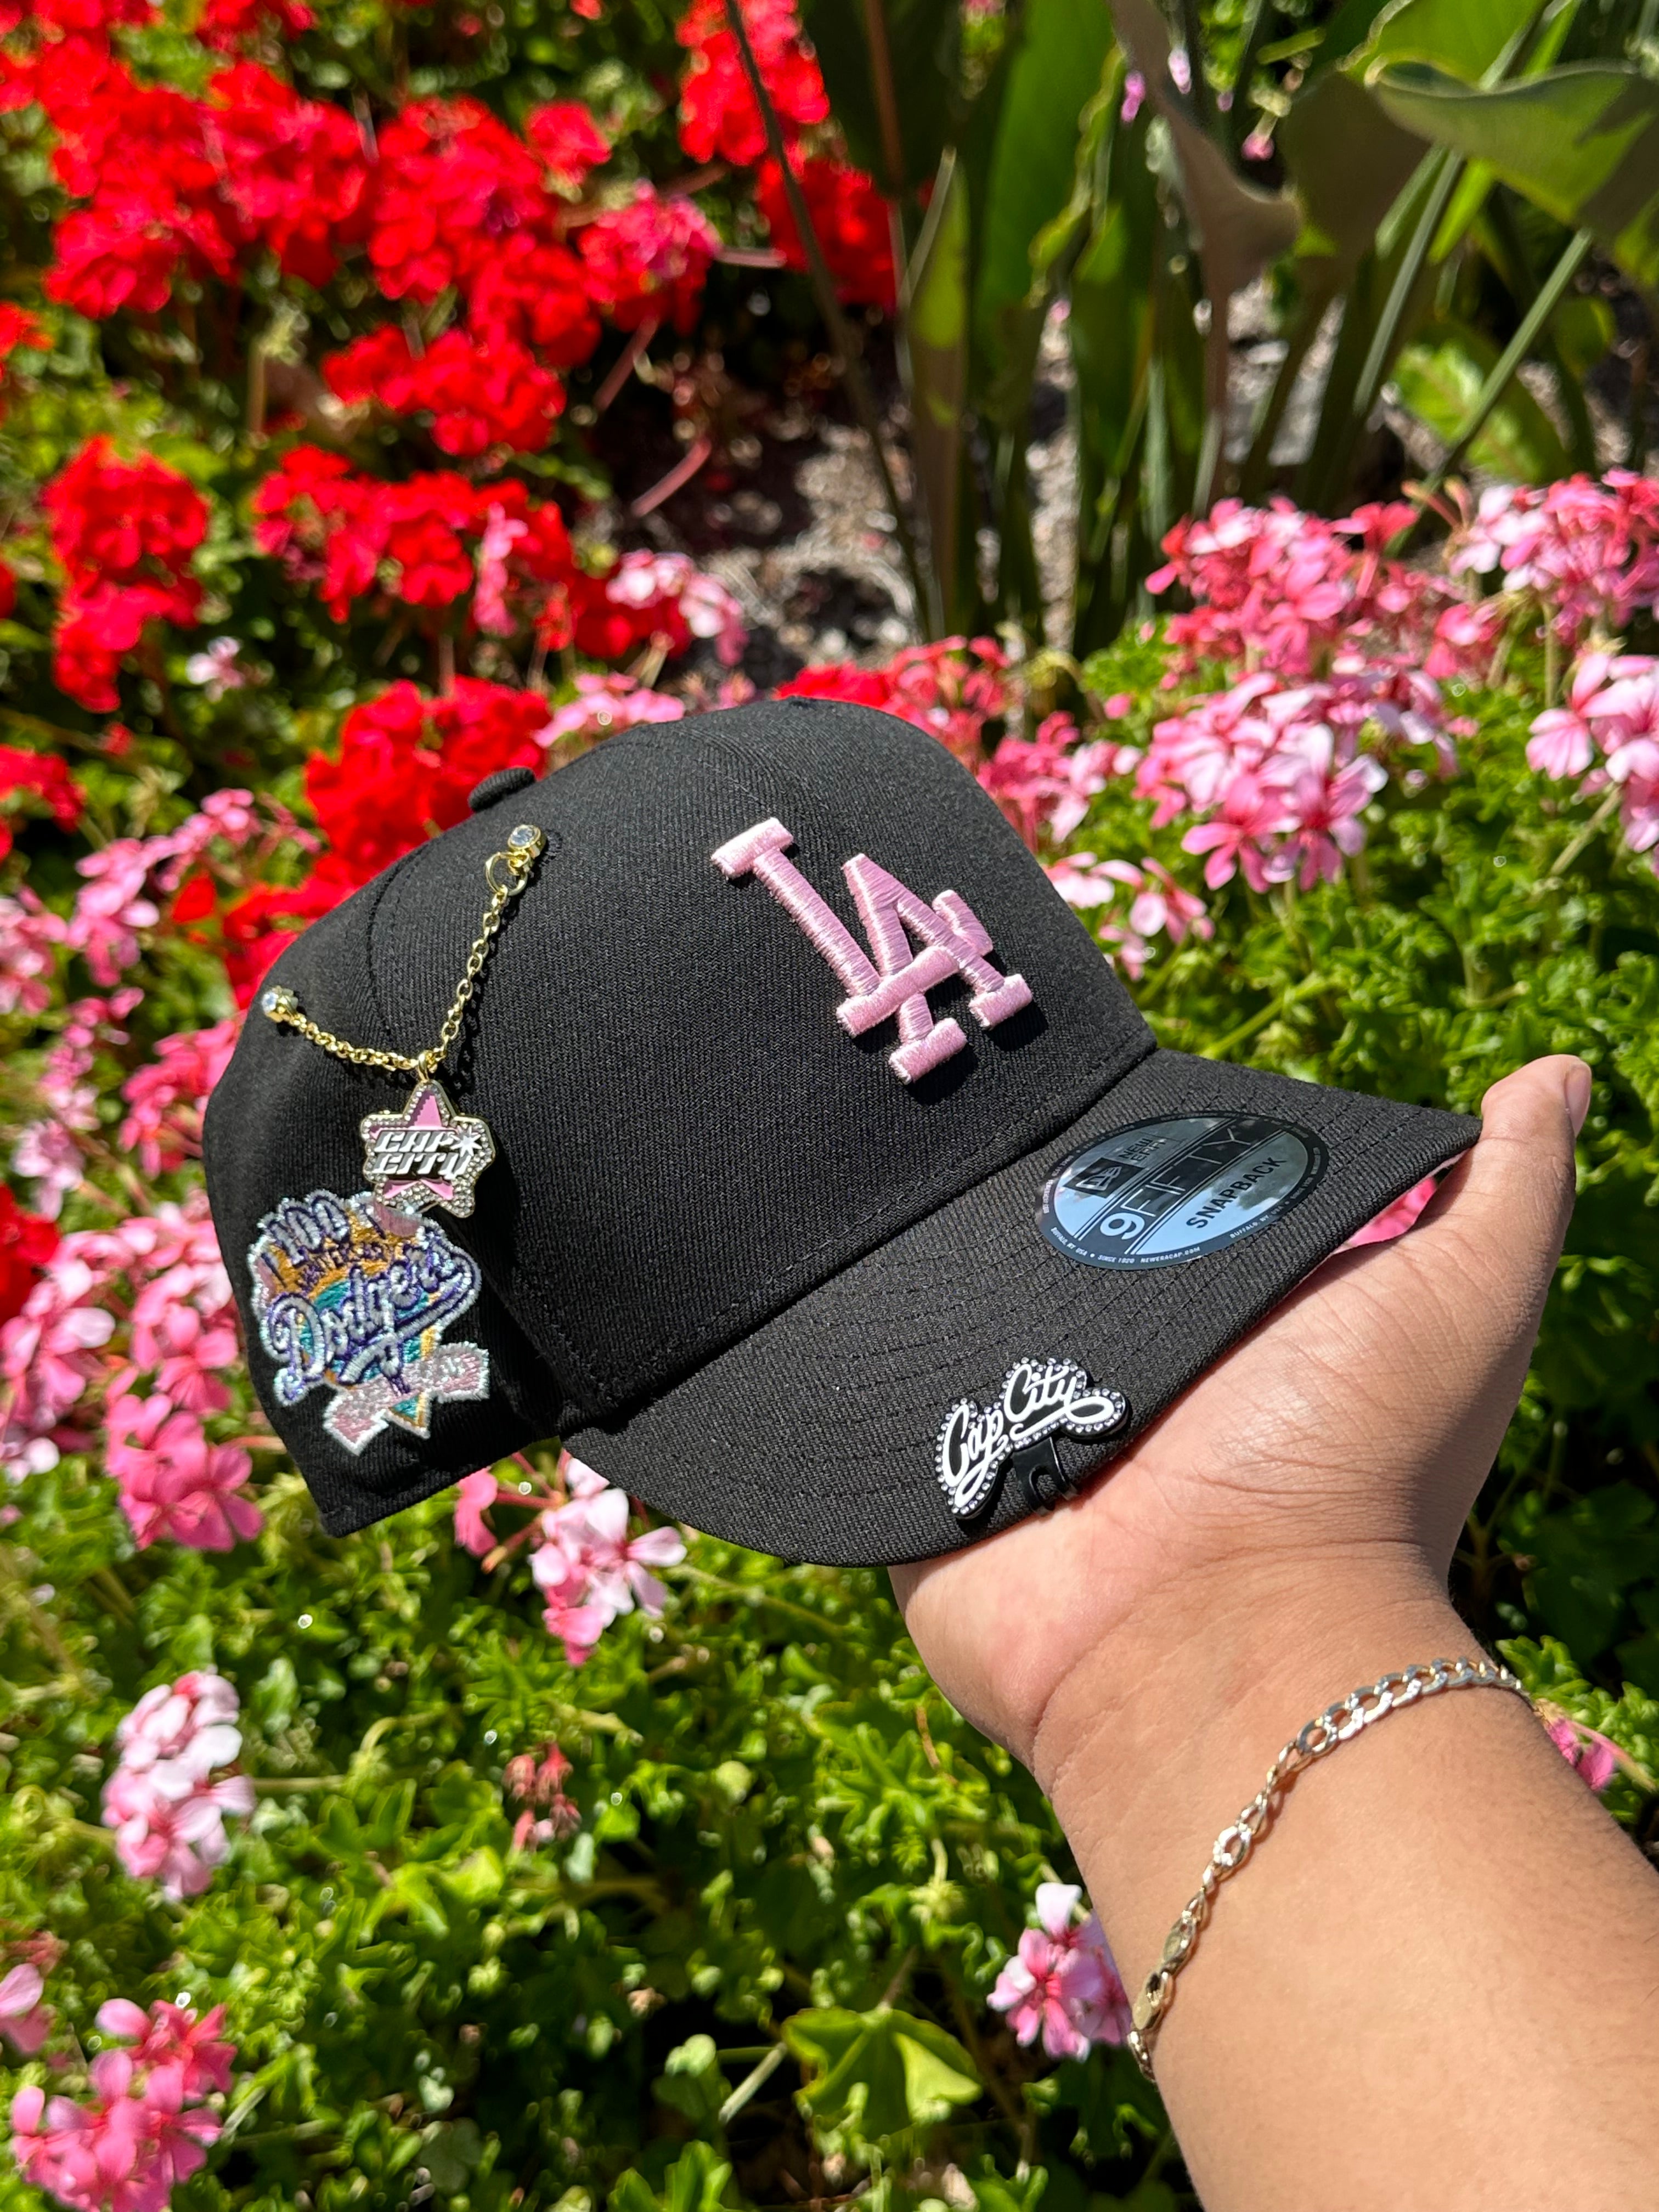 NEW ERA EXCLUSIVE 9FIFTY BLACK LOS ANGELES DODGERS SNAPBACK W/ 100TH ANNIVERSARY PATCH